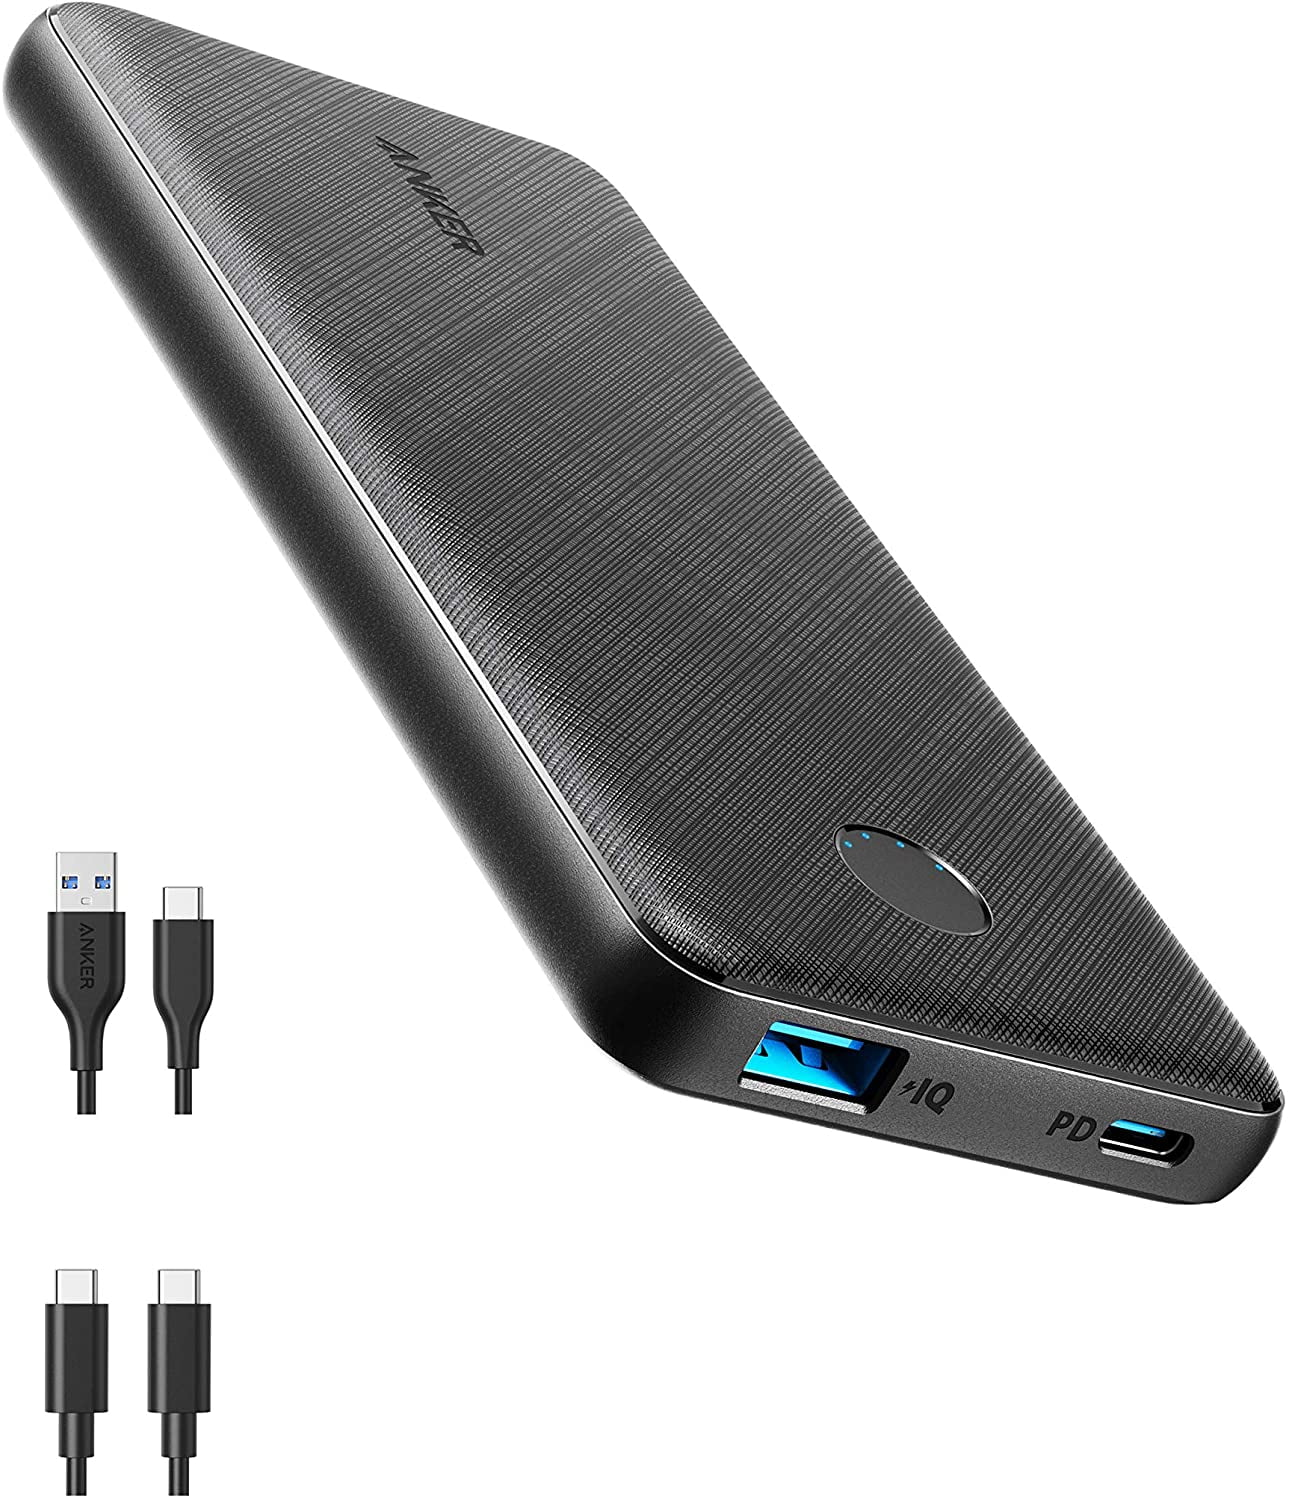 USB-C PD 20W Fast Charging Portable Charger Woisco 10000mAh Power Bank Samsung Galaxy S21/S20 Dual Outputs Cell Phone Battery Pack for iPhone 13/12 Pro Max iPad Pro and More 